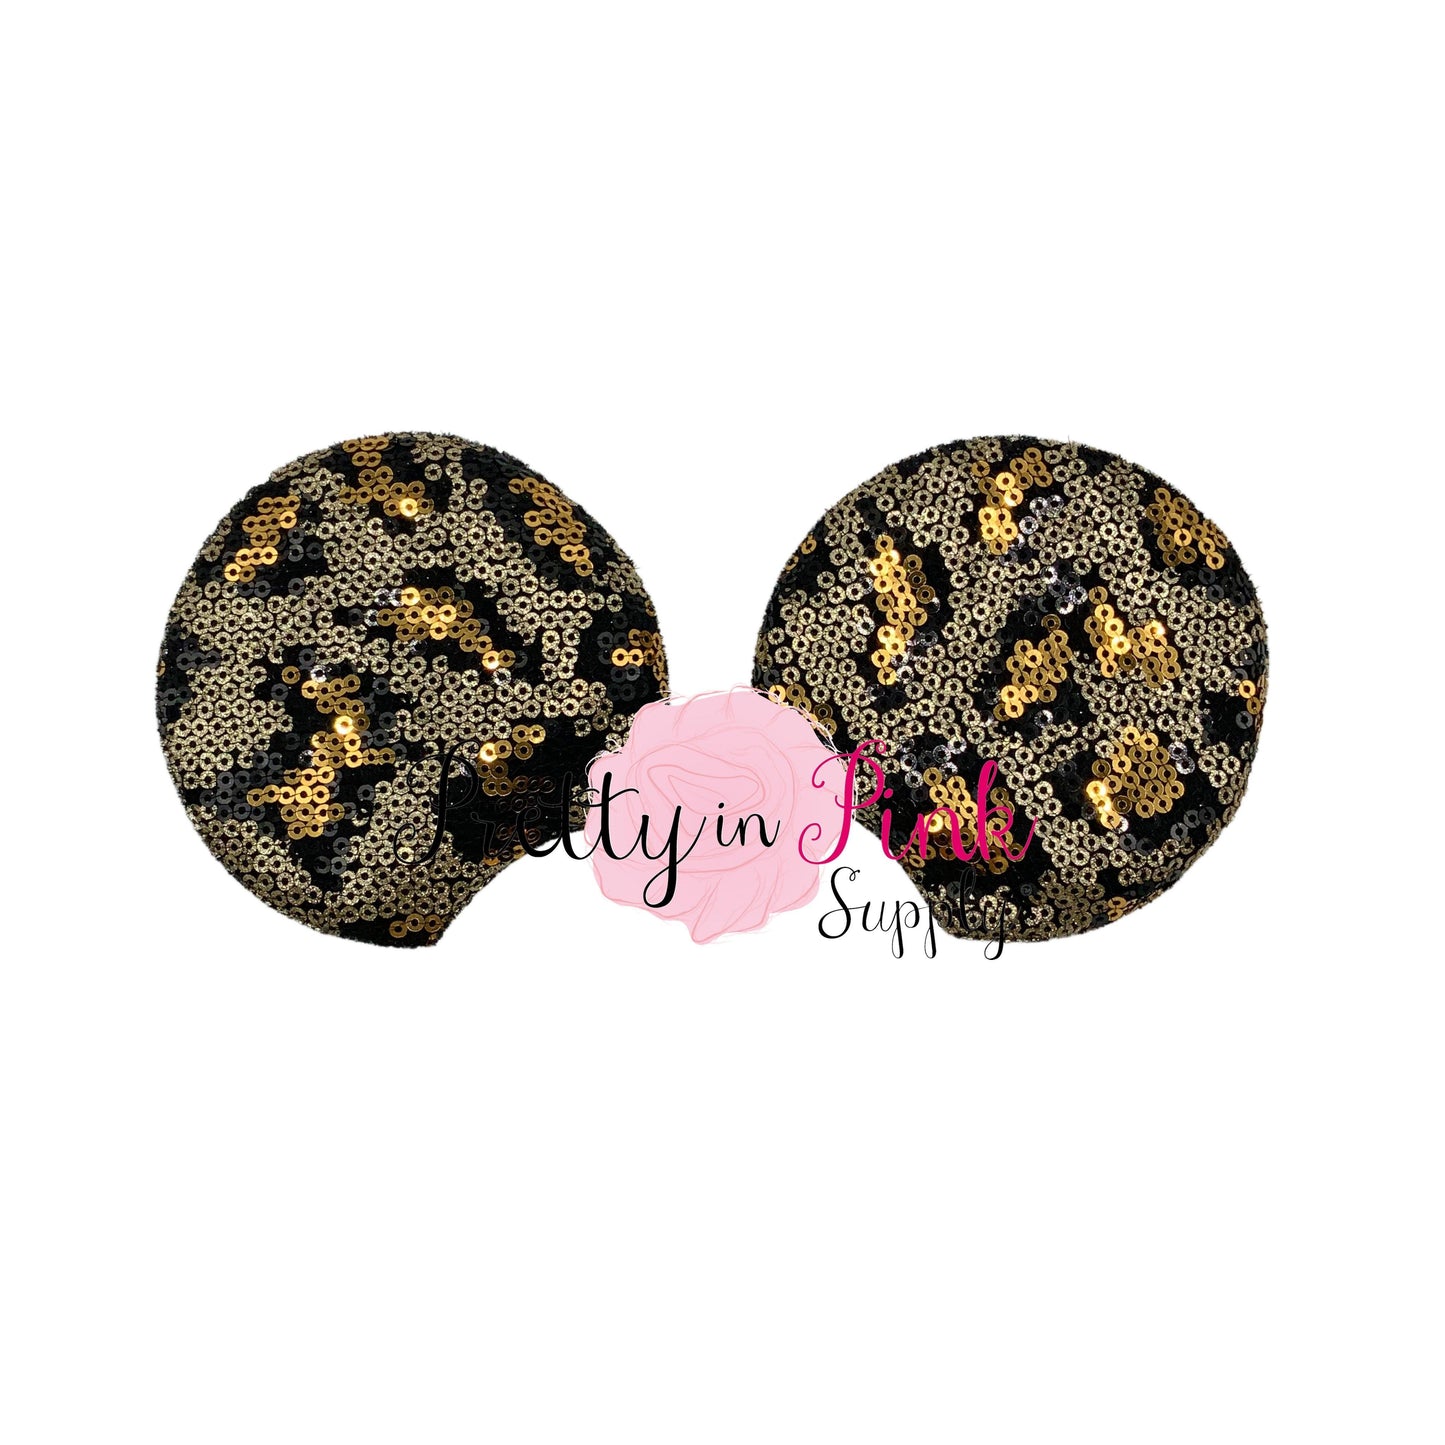 3.25" SEQUIN Leopard Mouse Ears - Pretty in Pink Supply